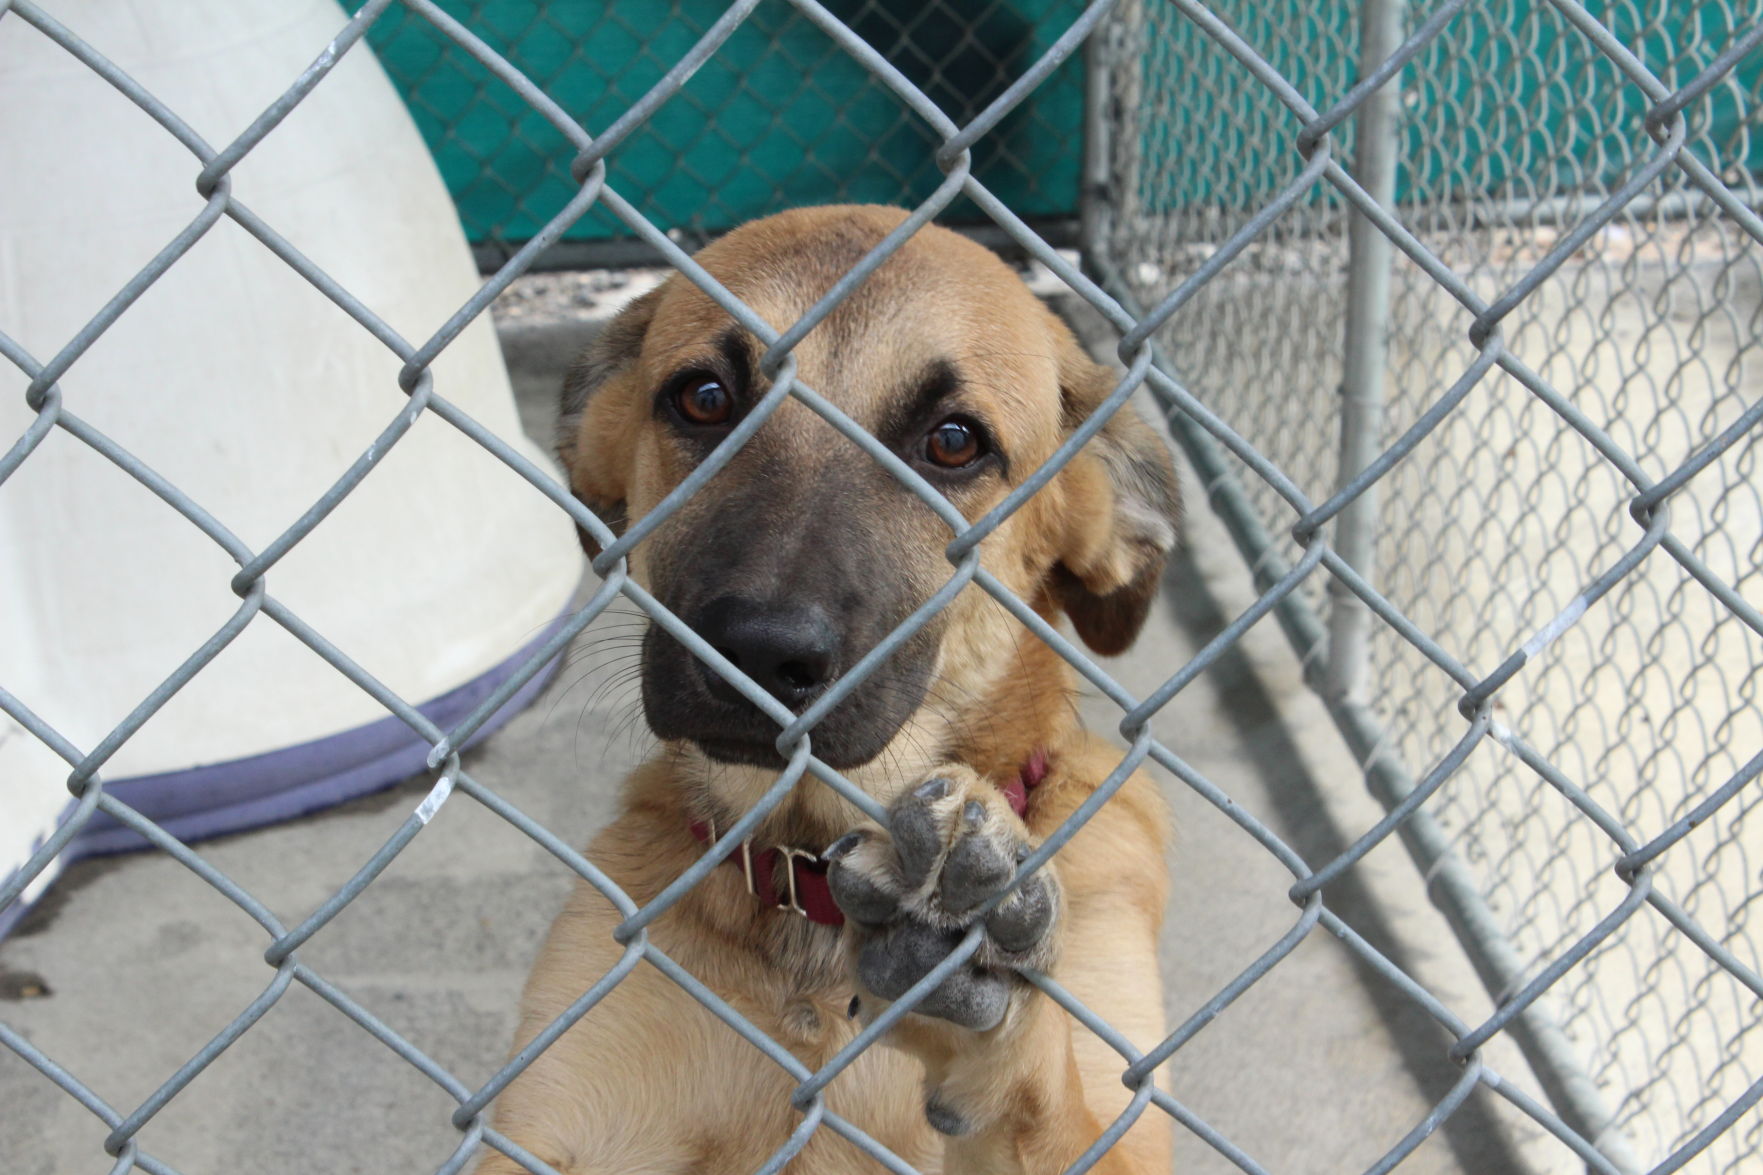 columbia county dog shelter